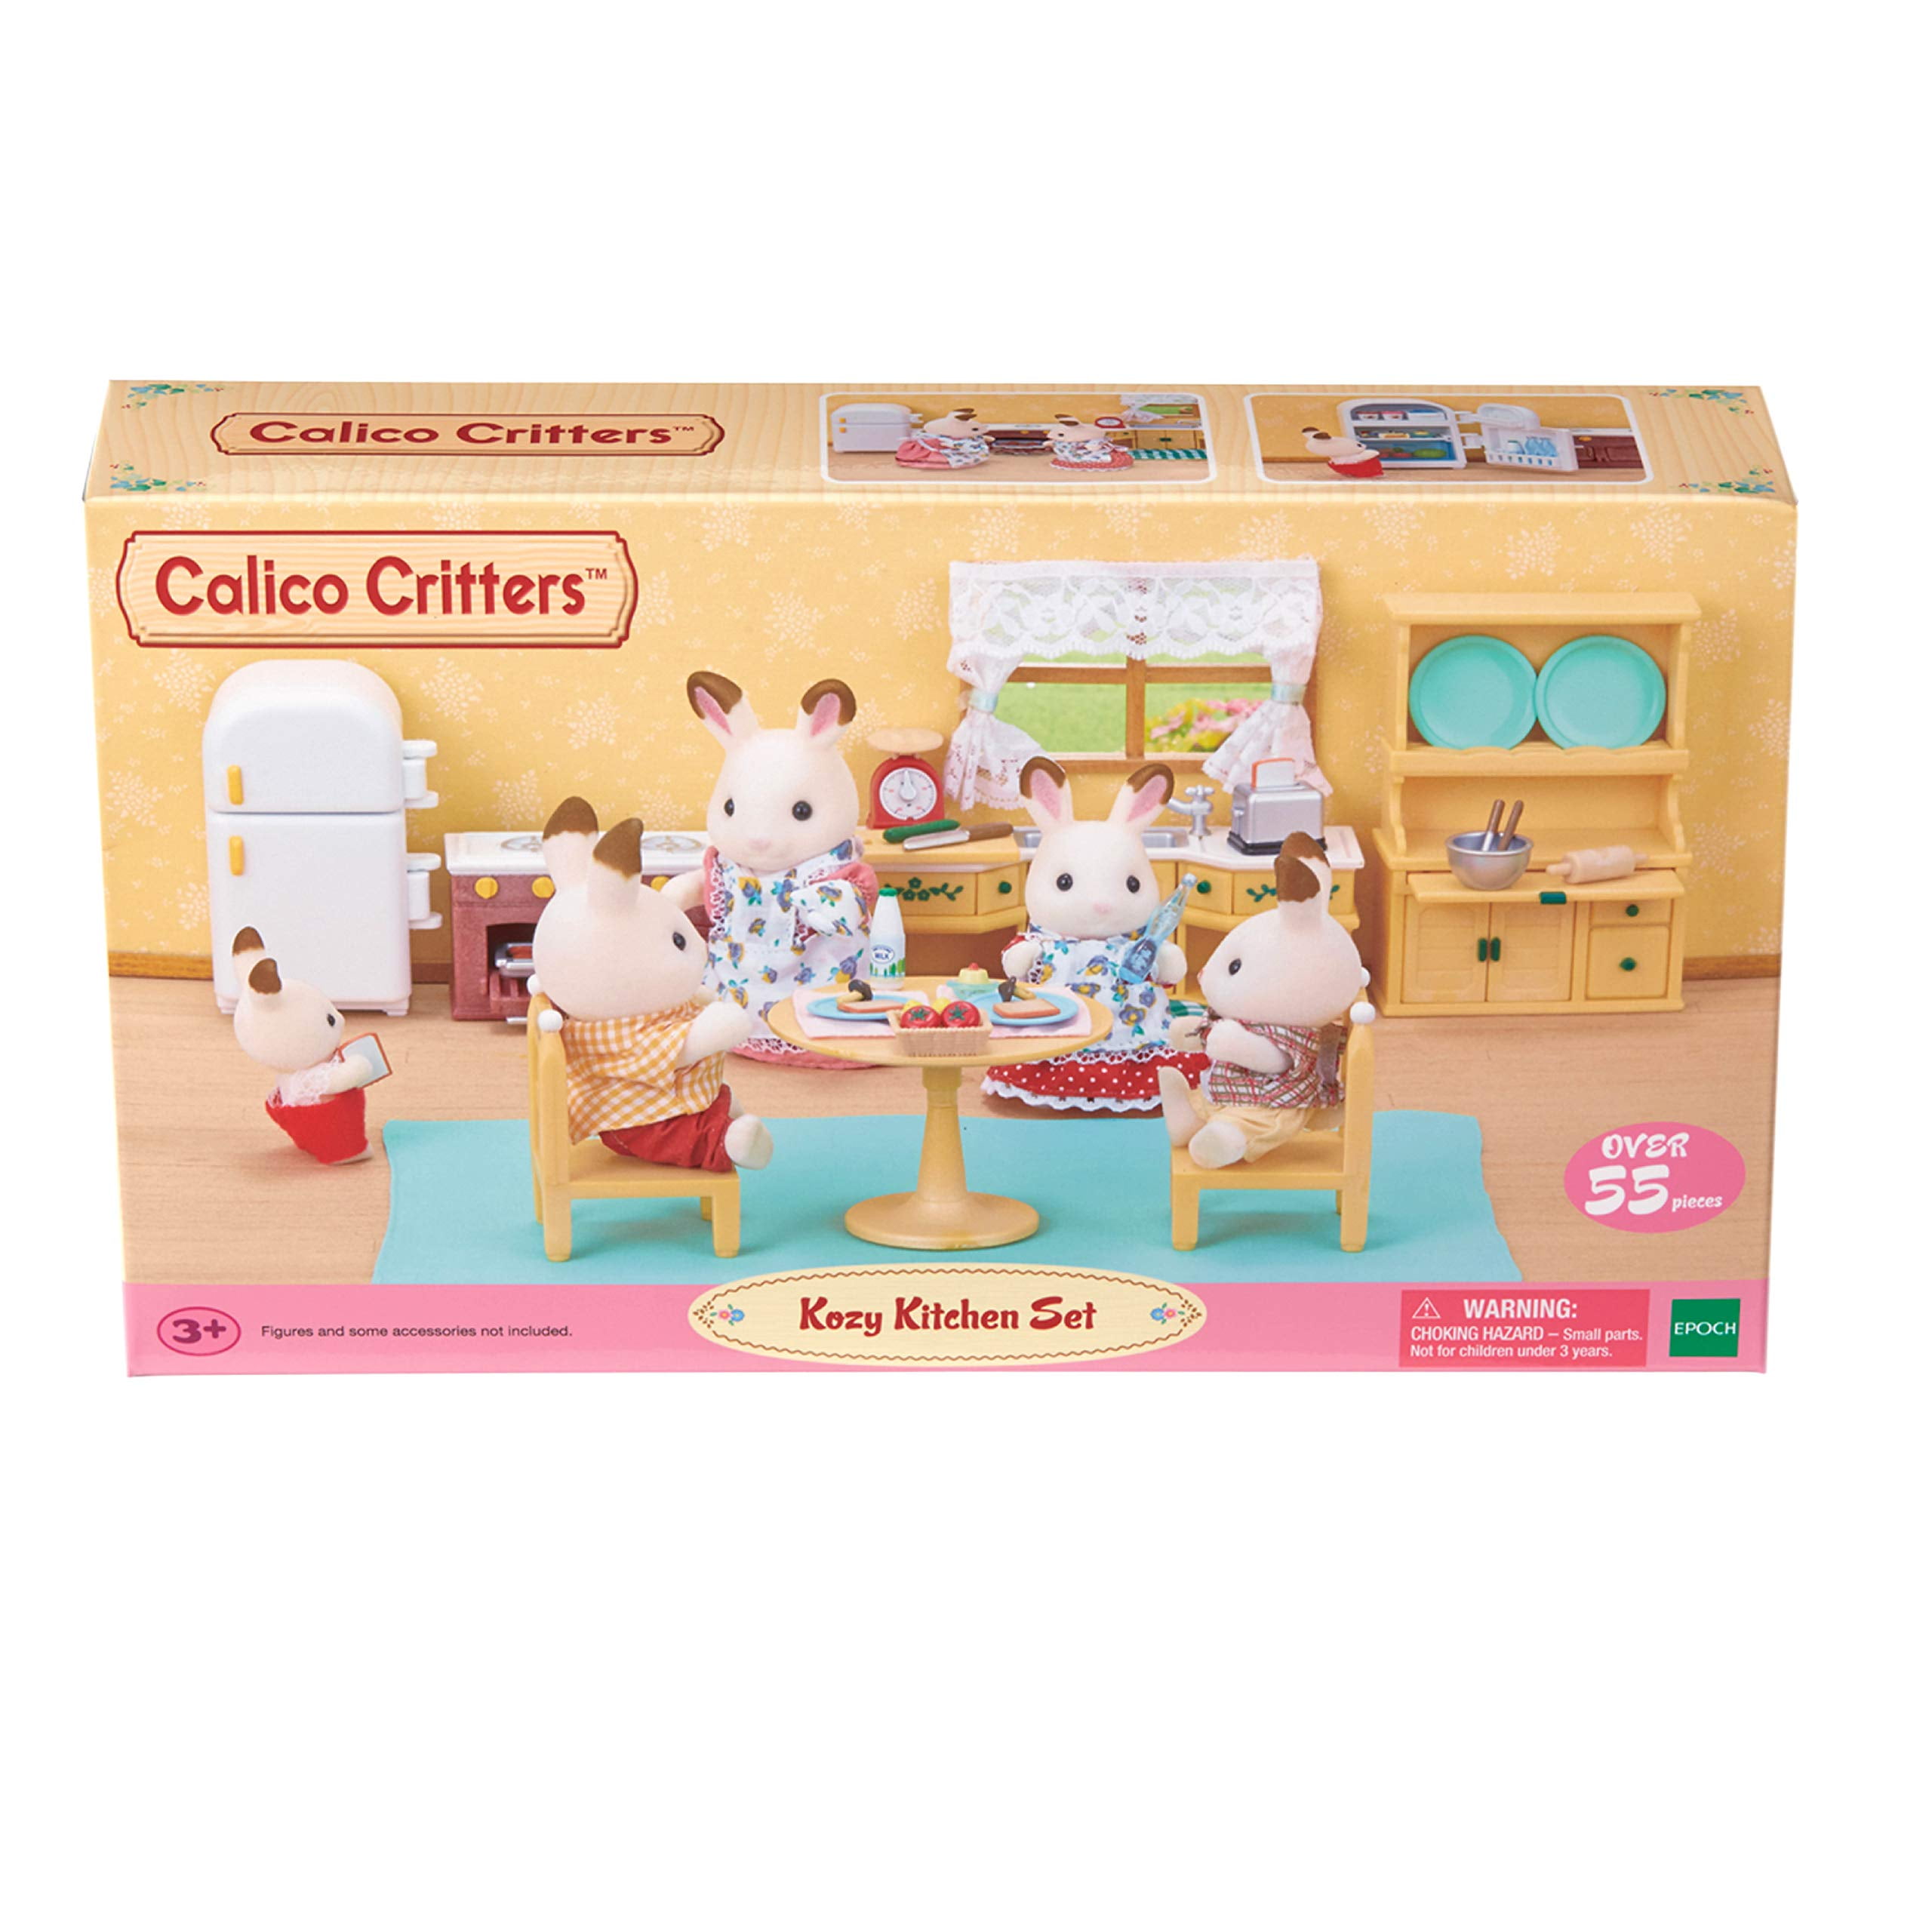 Calico Critters Deluxe Kitchen Set New Free Shipping 